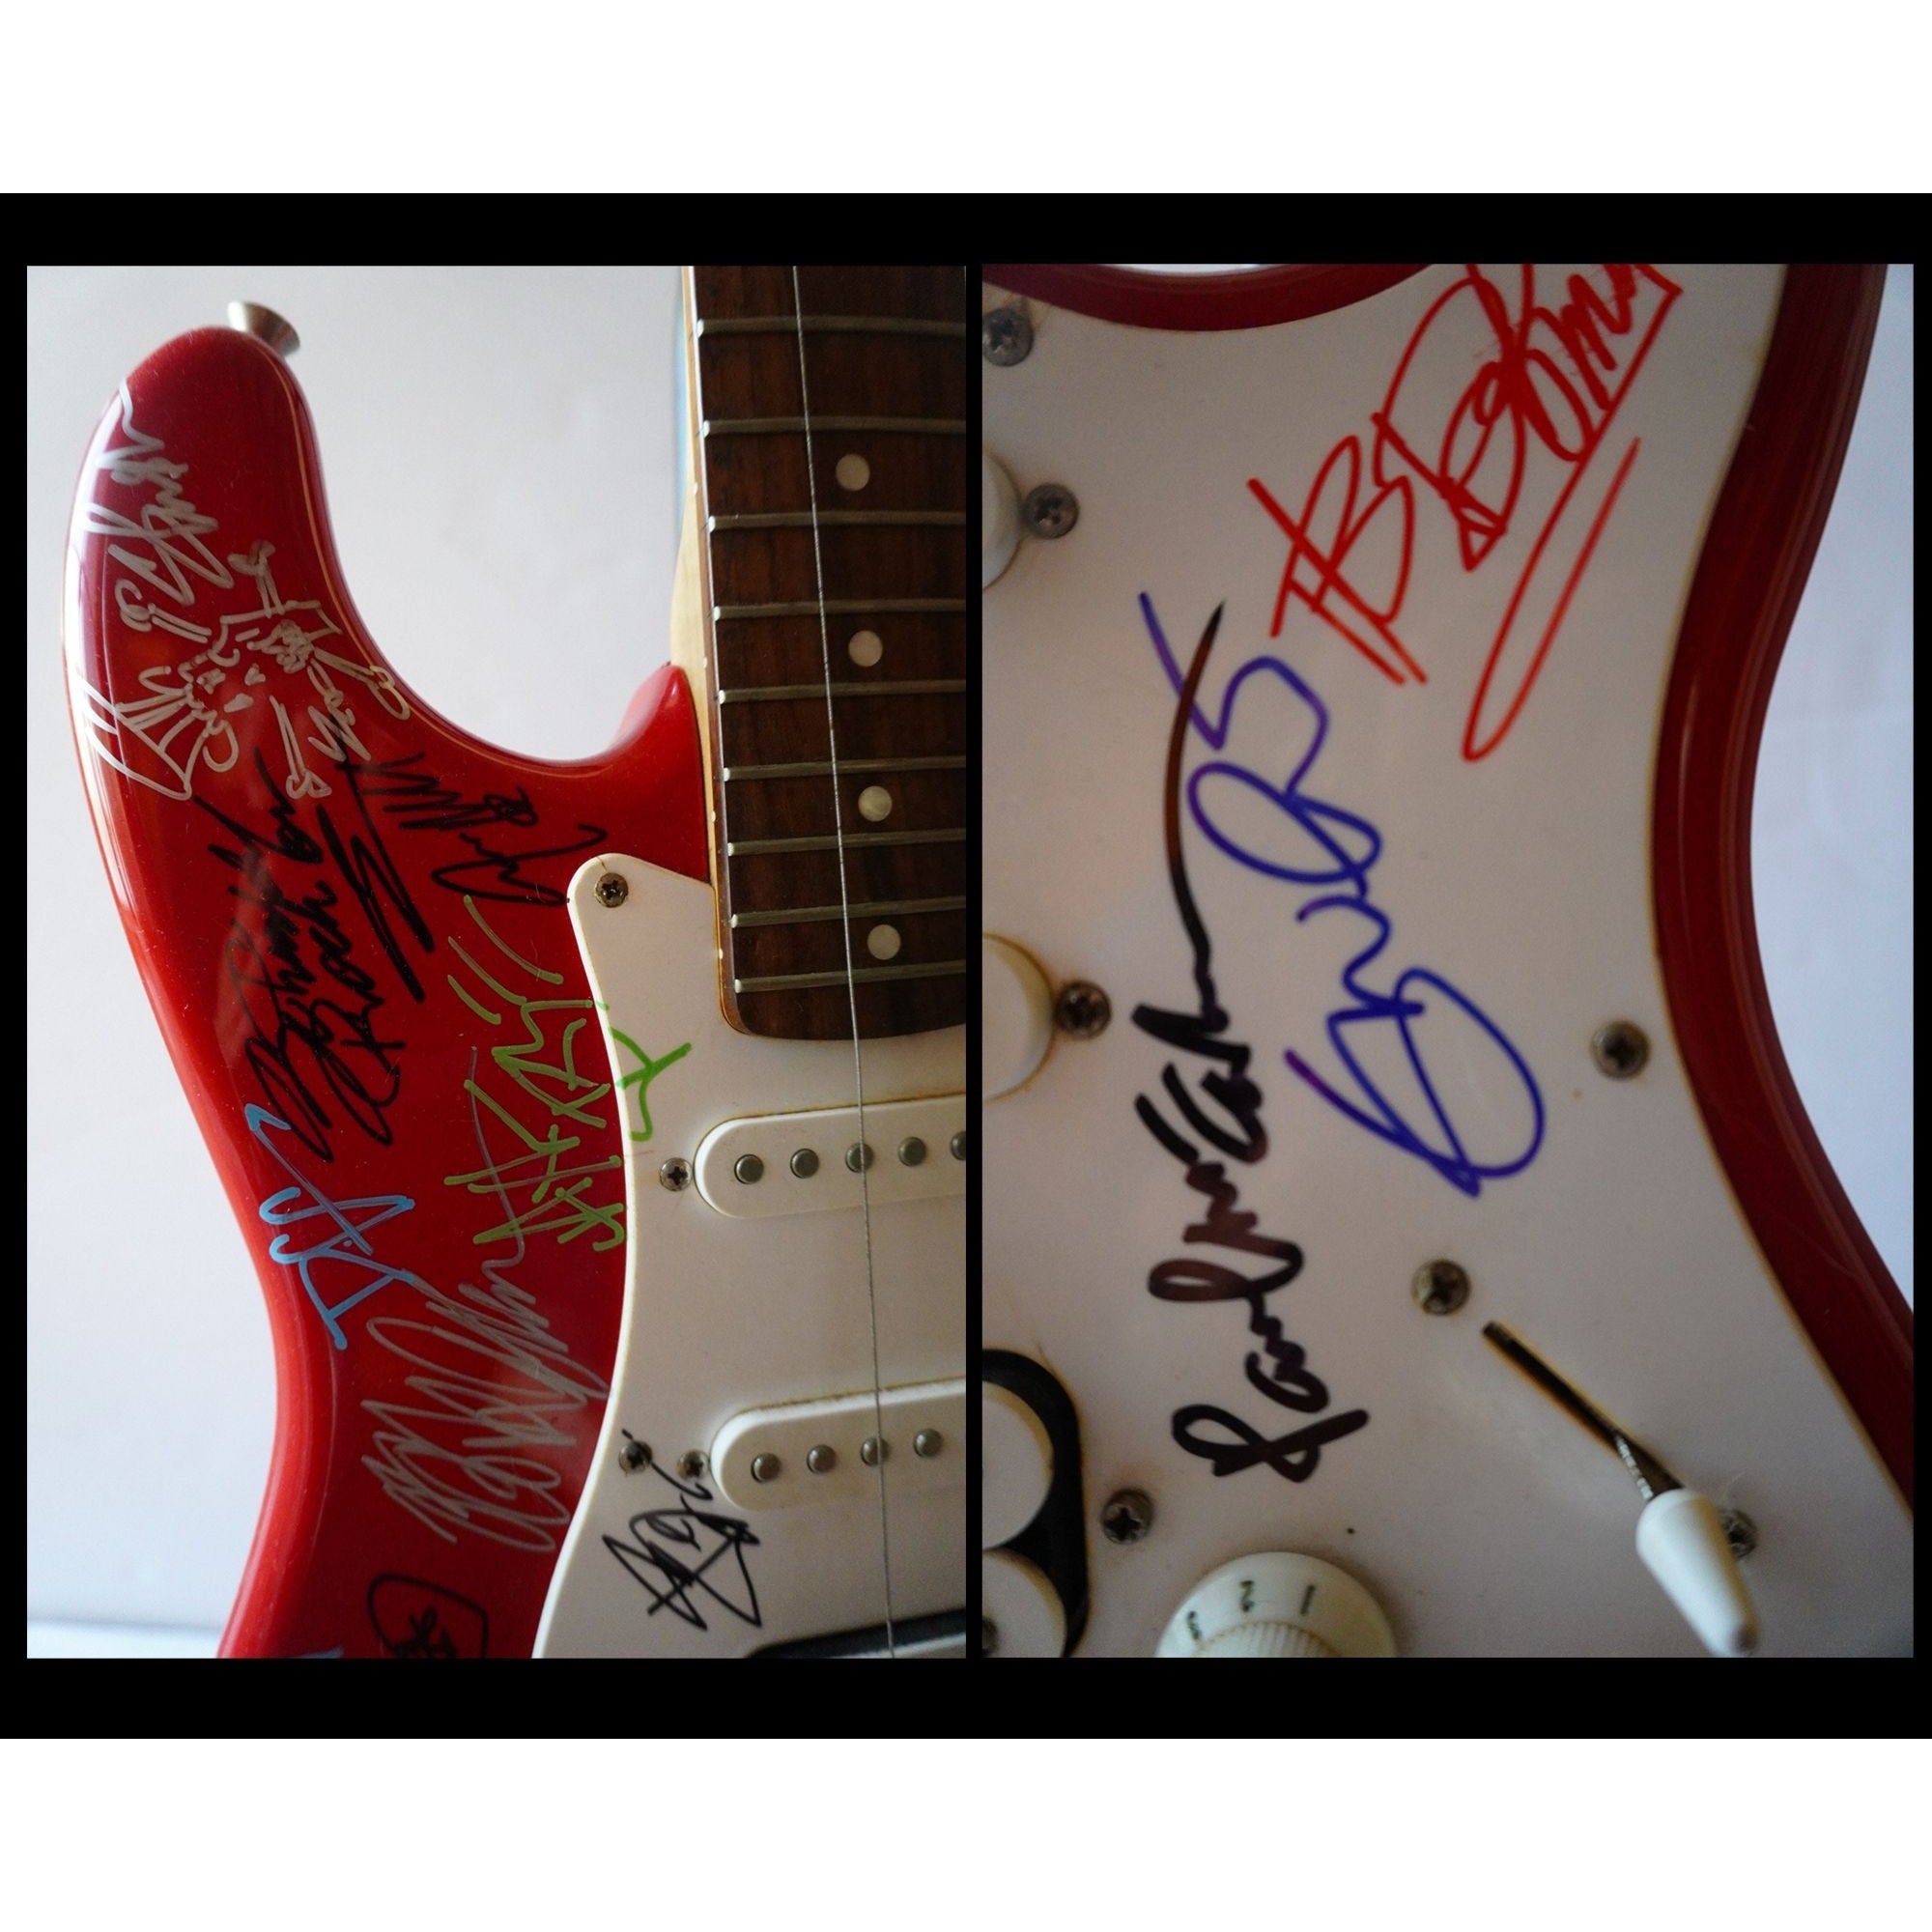 Fender electric guitar Tom Petty, Paul McCartney, Eric Clapton signed with proof